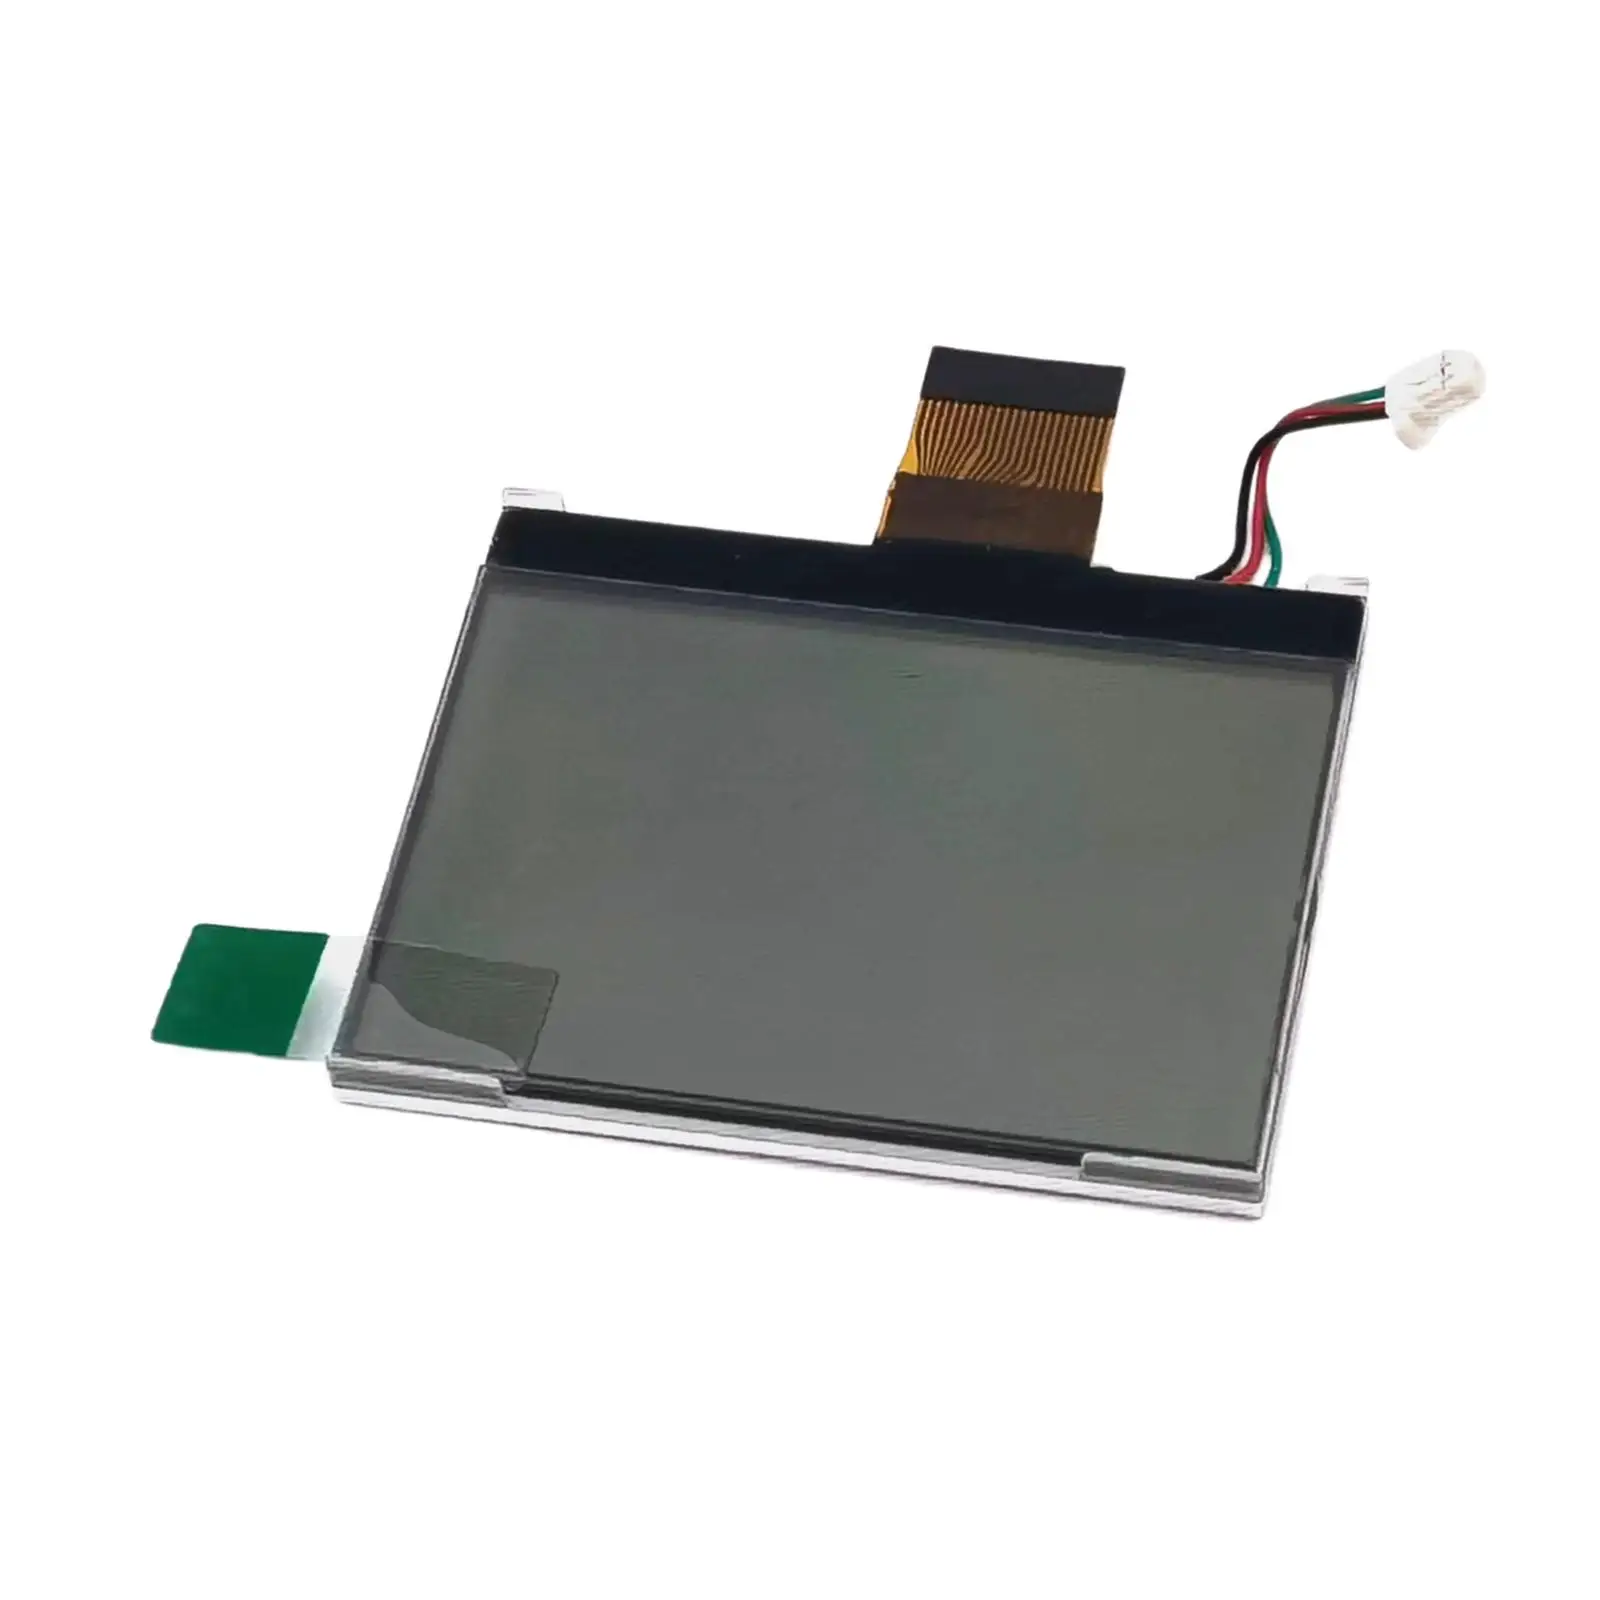 LCD Screen High Performance Flash Repair Part Replacement Parts for V860 TT685 V860II AD360II Accessories